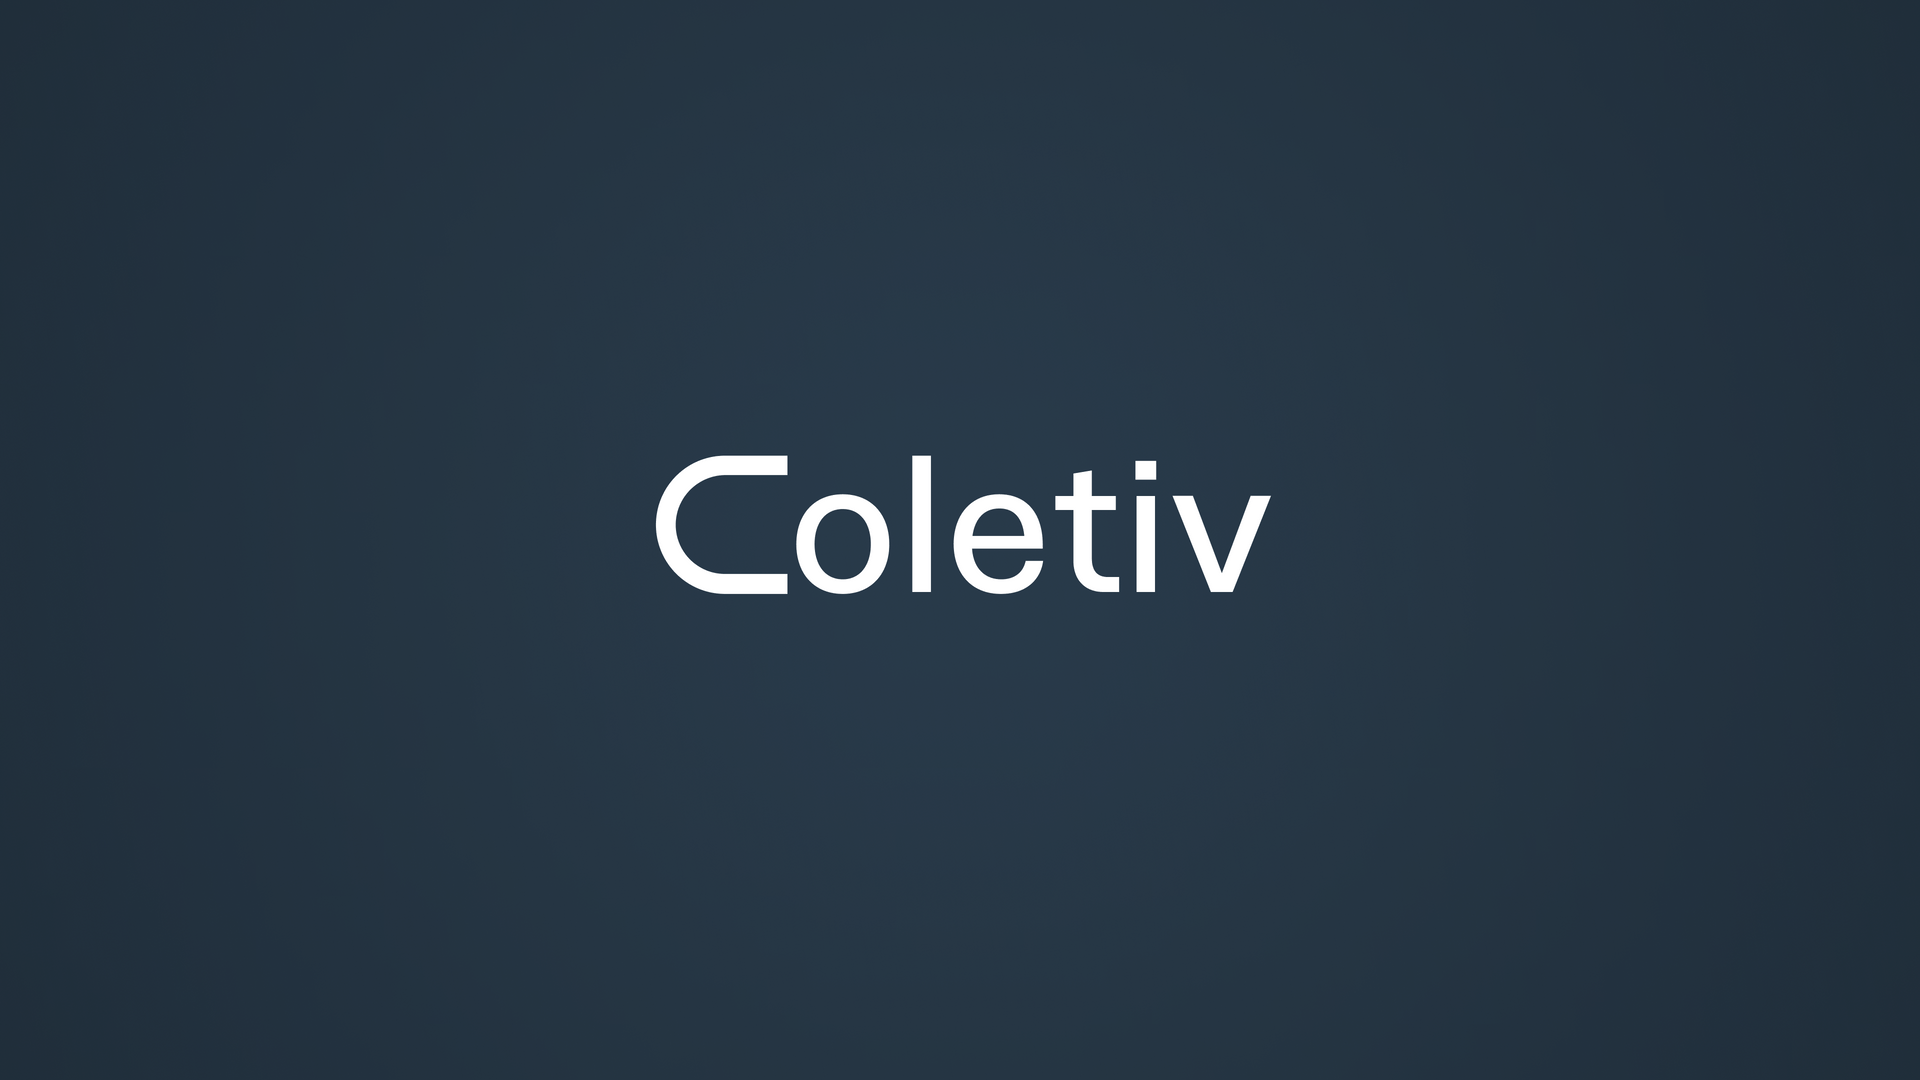 The new Coletiv logo displays the mathematical symbol of the union "∪"